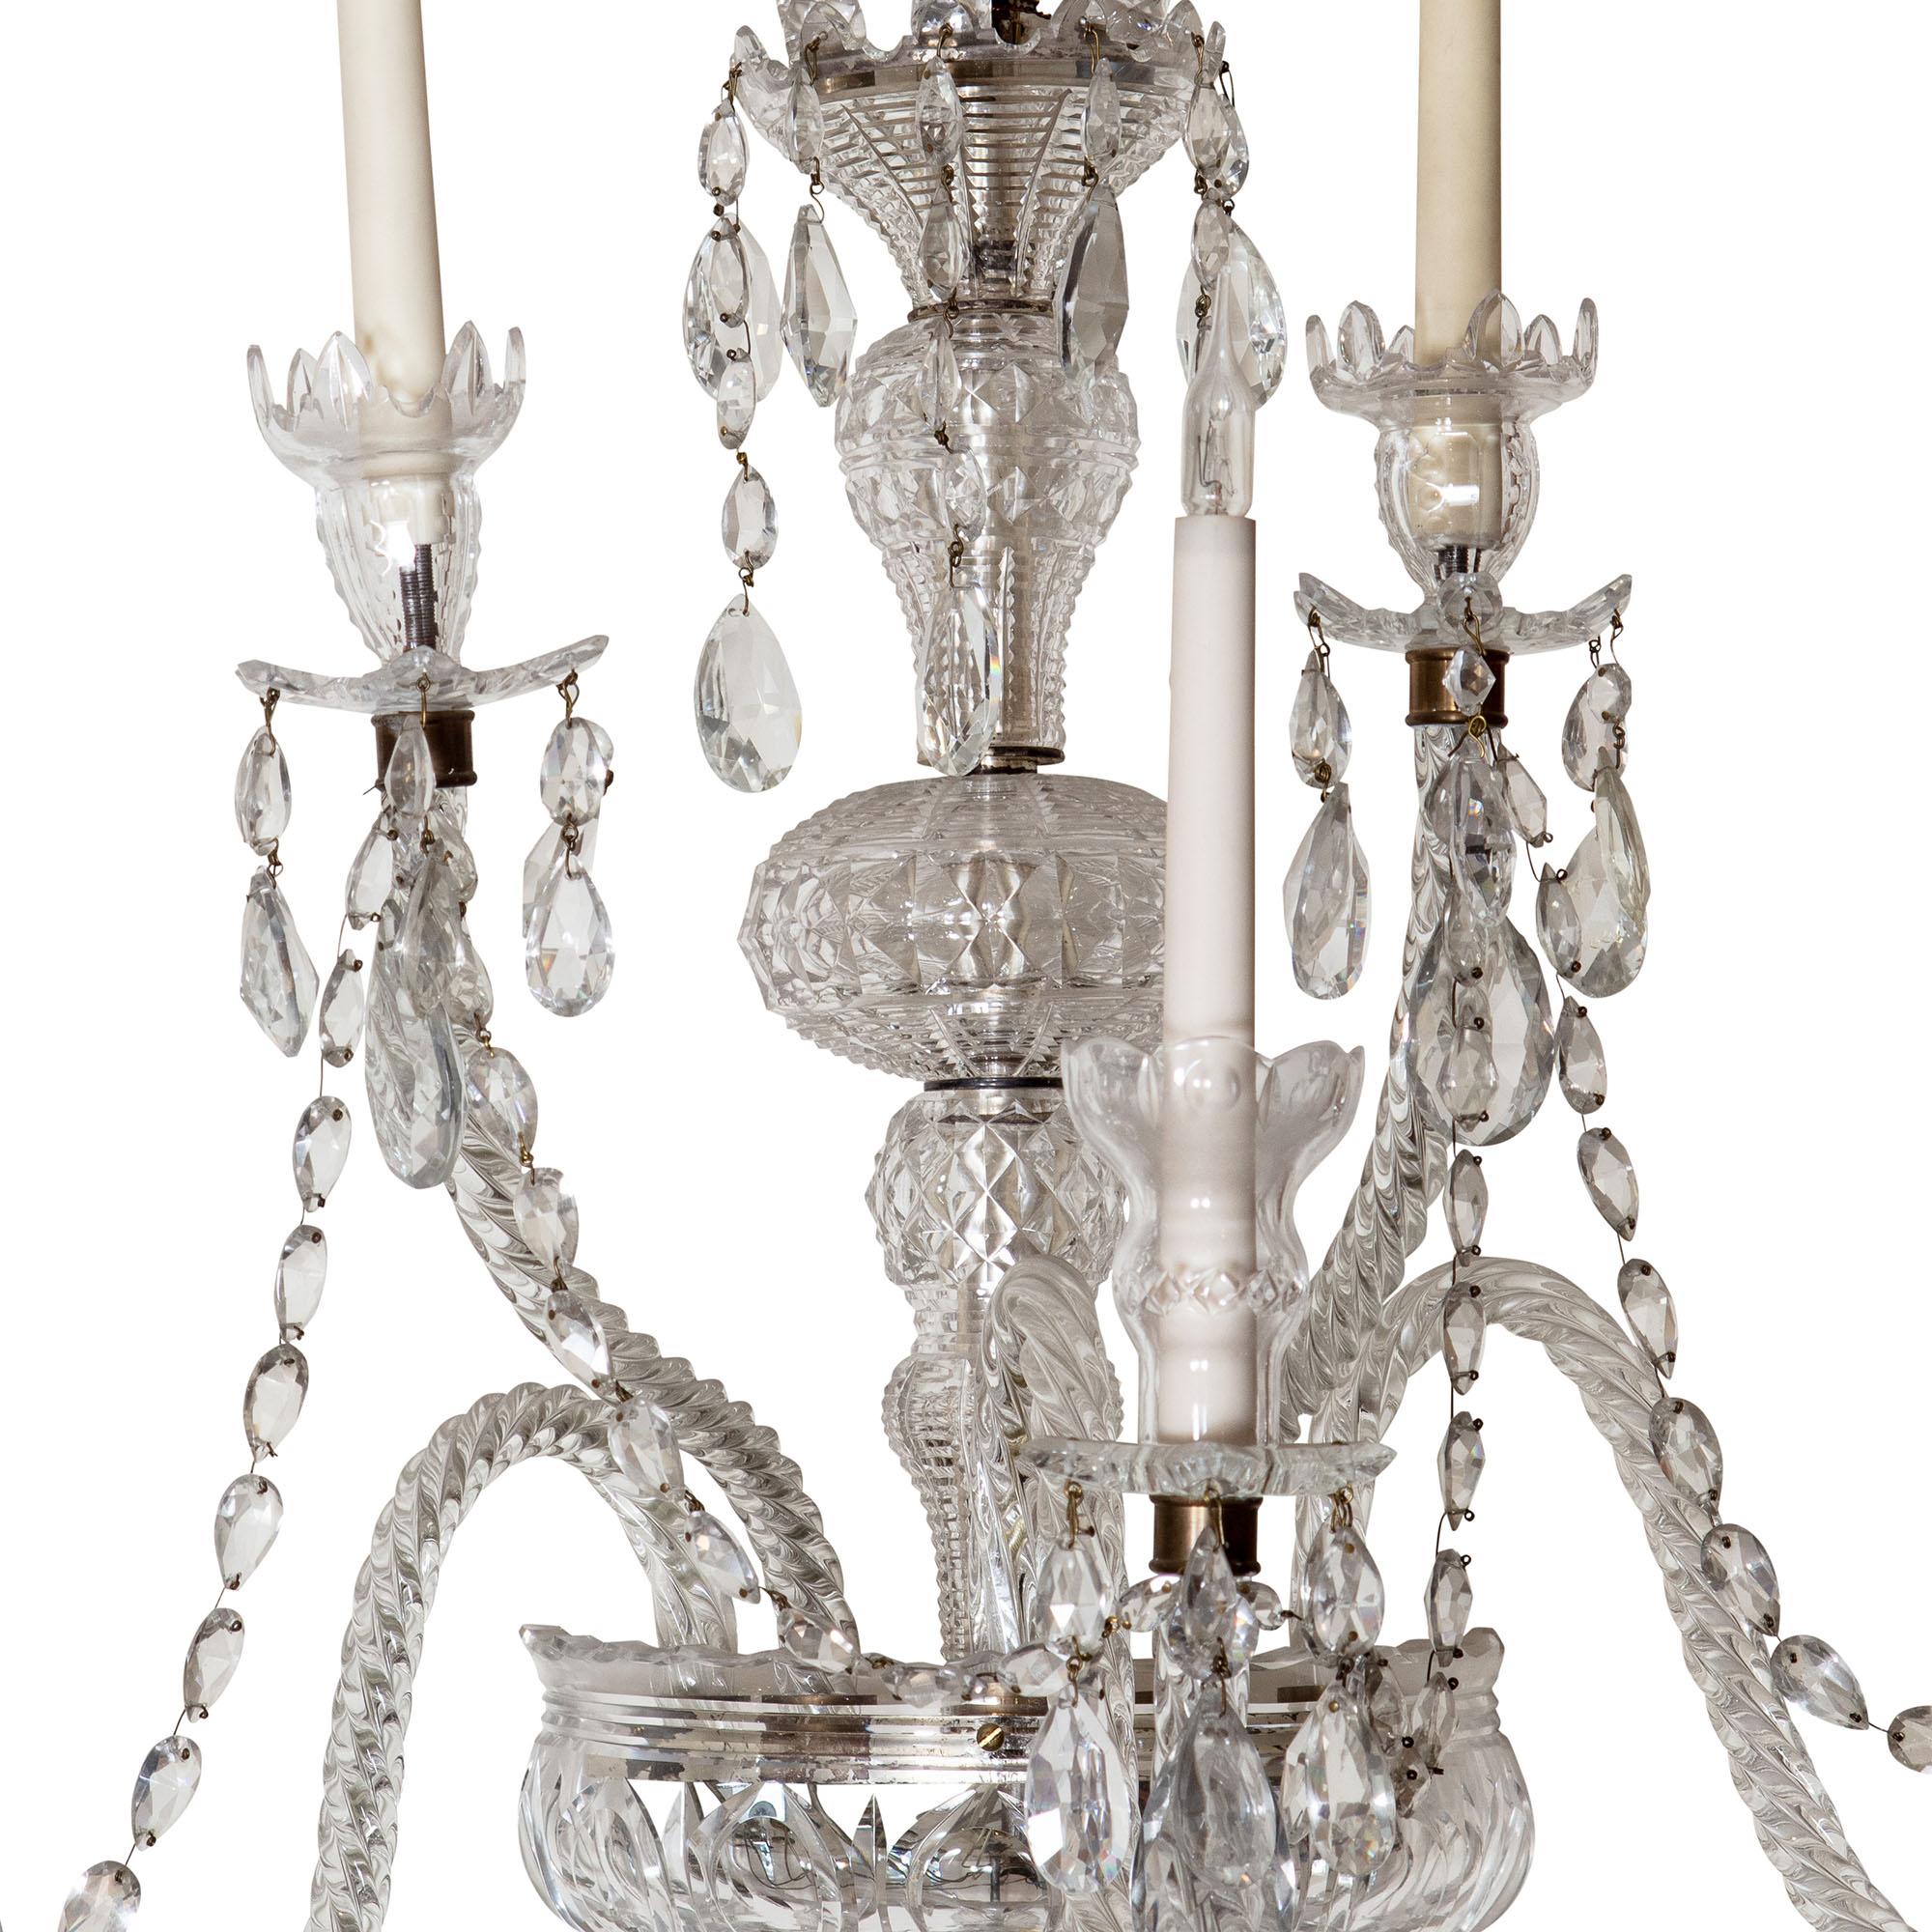 A Pair of Palatial 19th Century Cut Glass Five-Light Wall Lights In Good Condition For Sale In London, by appointment only